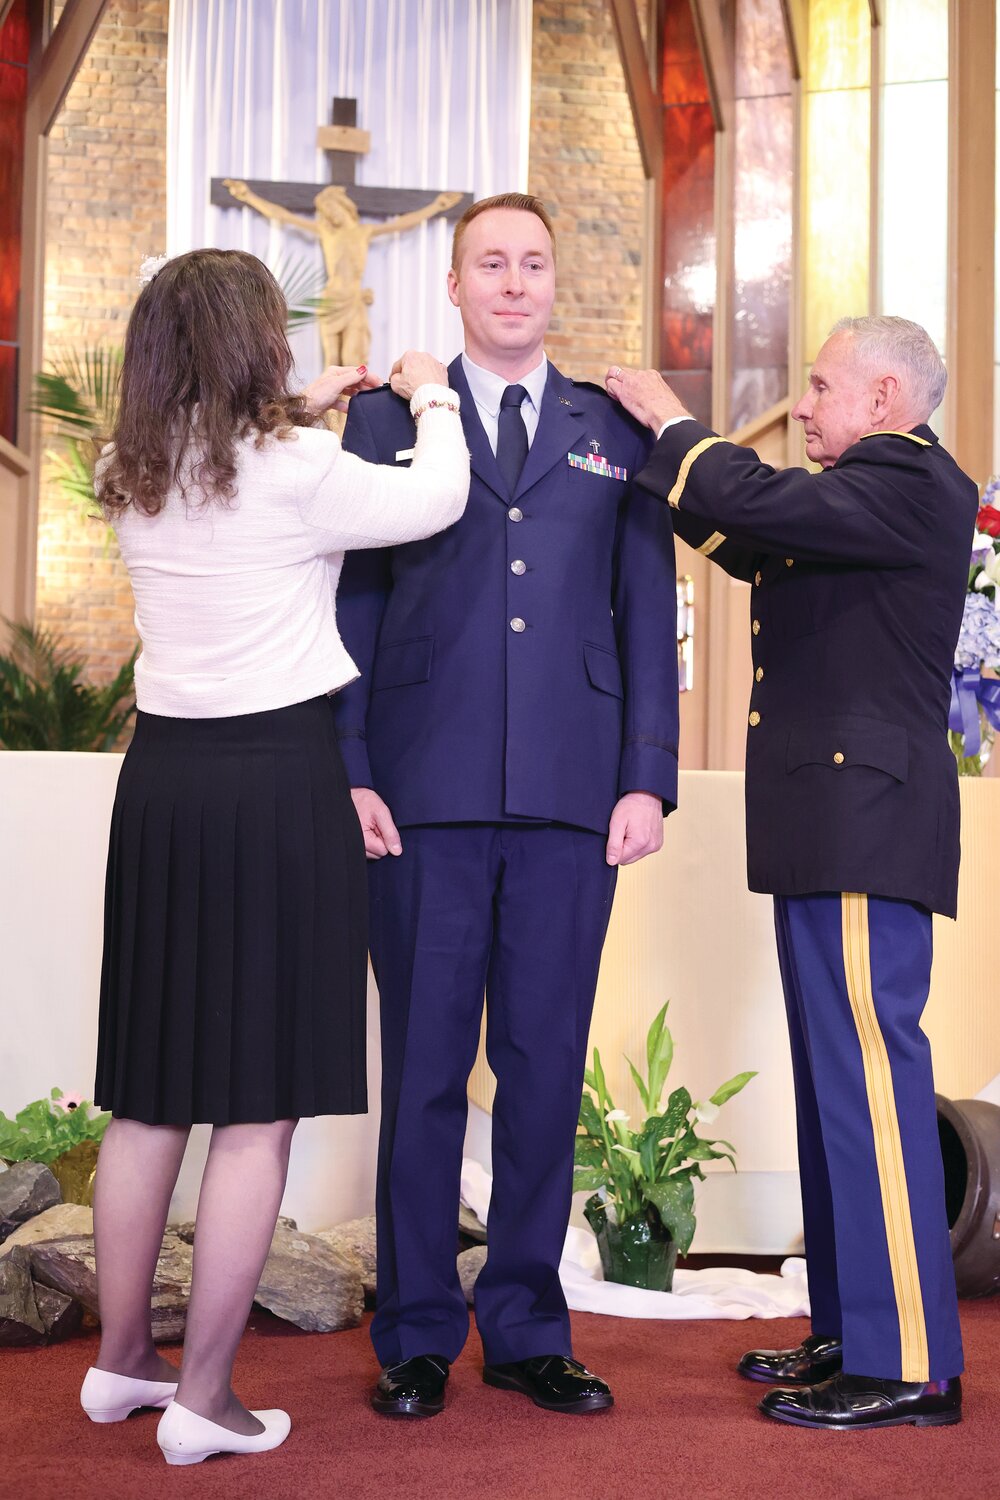 Lt. Col. Father David G. Thurber Jr. looks on as his mother, Suzanne Gregoire, and retired Col. Paul St. Laurent pin his new rank upon his shoulders during the promotion ceremony on April 24.